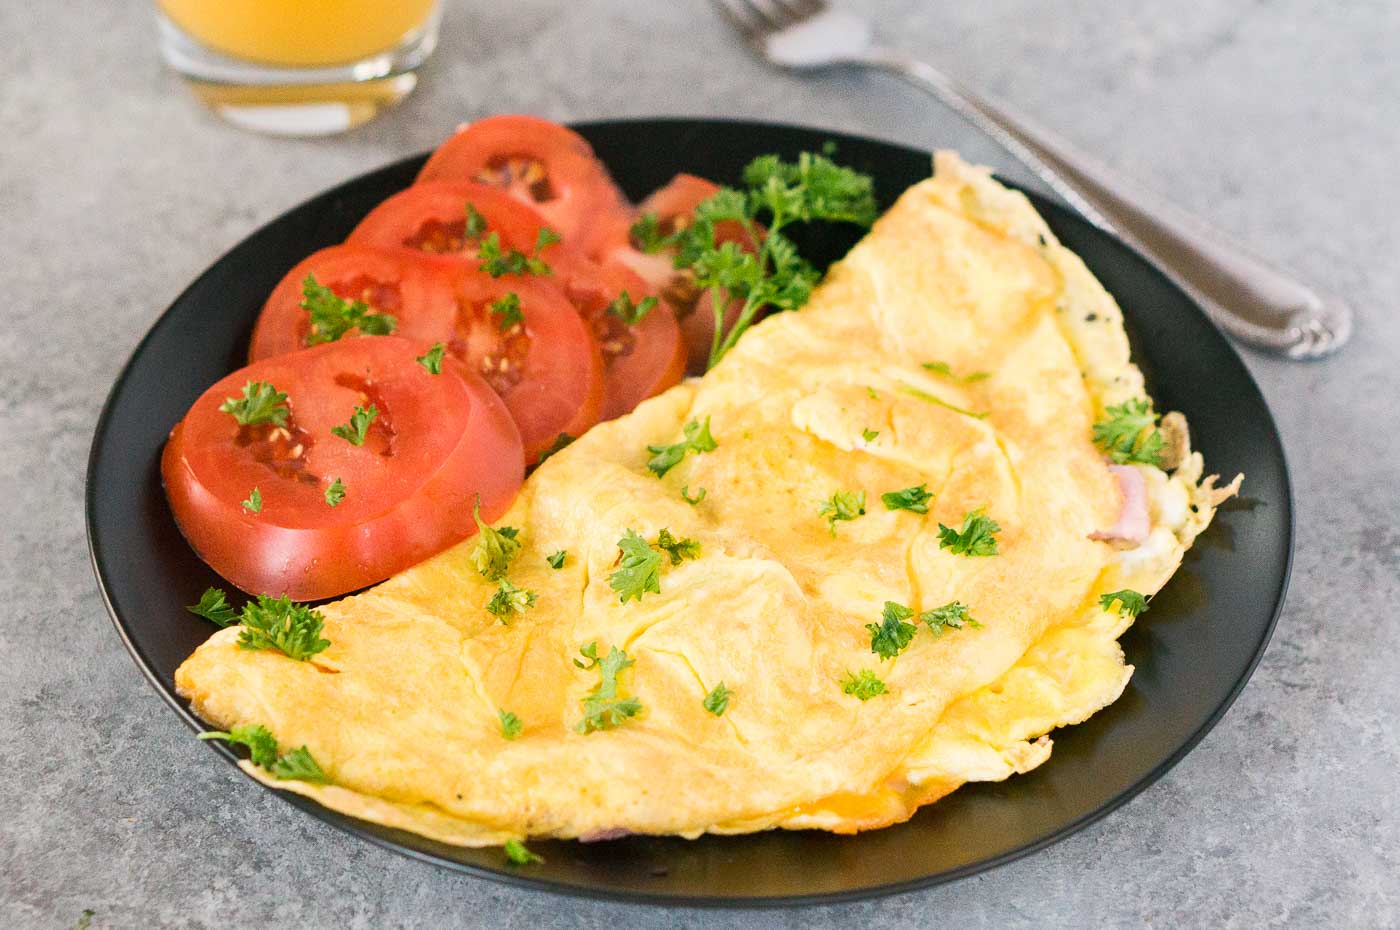 American style omelet on a plate with tomato slices